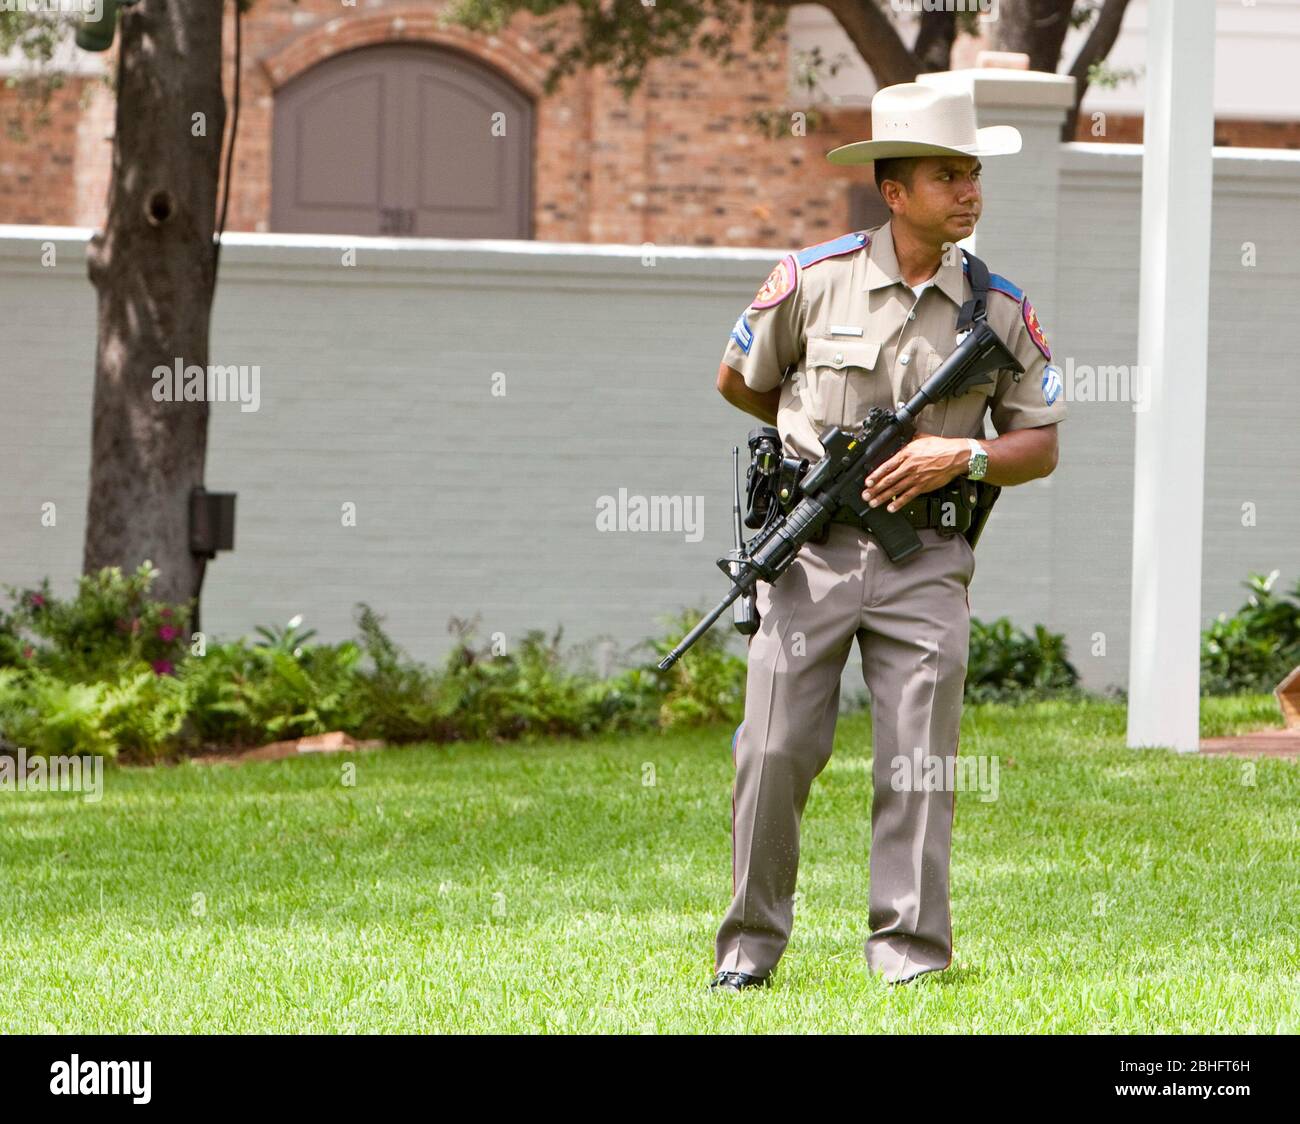 Austin, Texas USA, July 18, 2012: Officer with the Texas Department of Public Safety carries large weapon while on duty on the Texas Governor's Mansion grounds. ©Marjorie Kamys Cotera/Daemmrich Photography Stock Photo